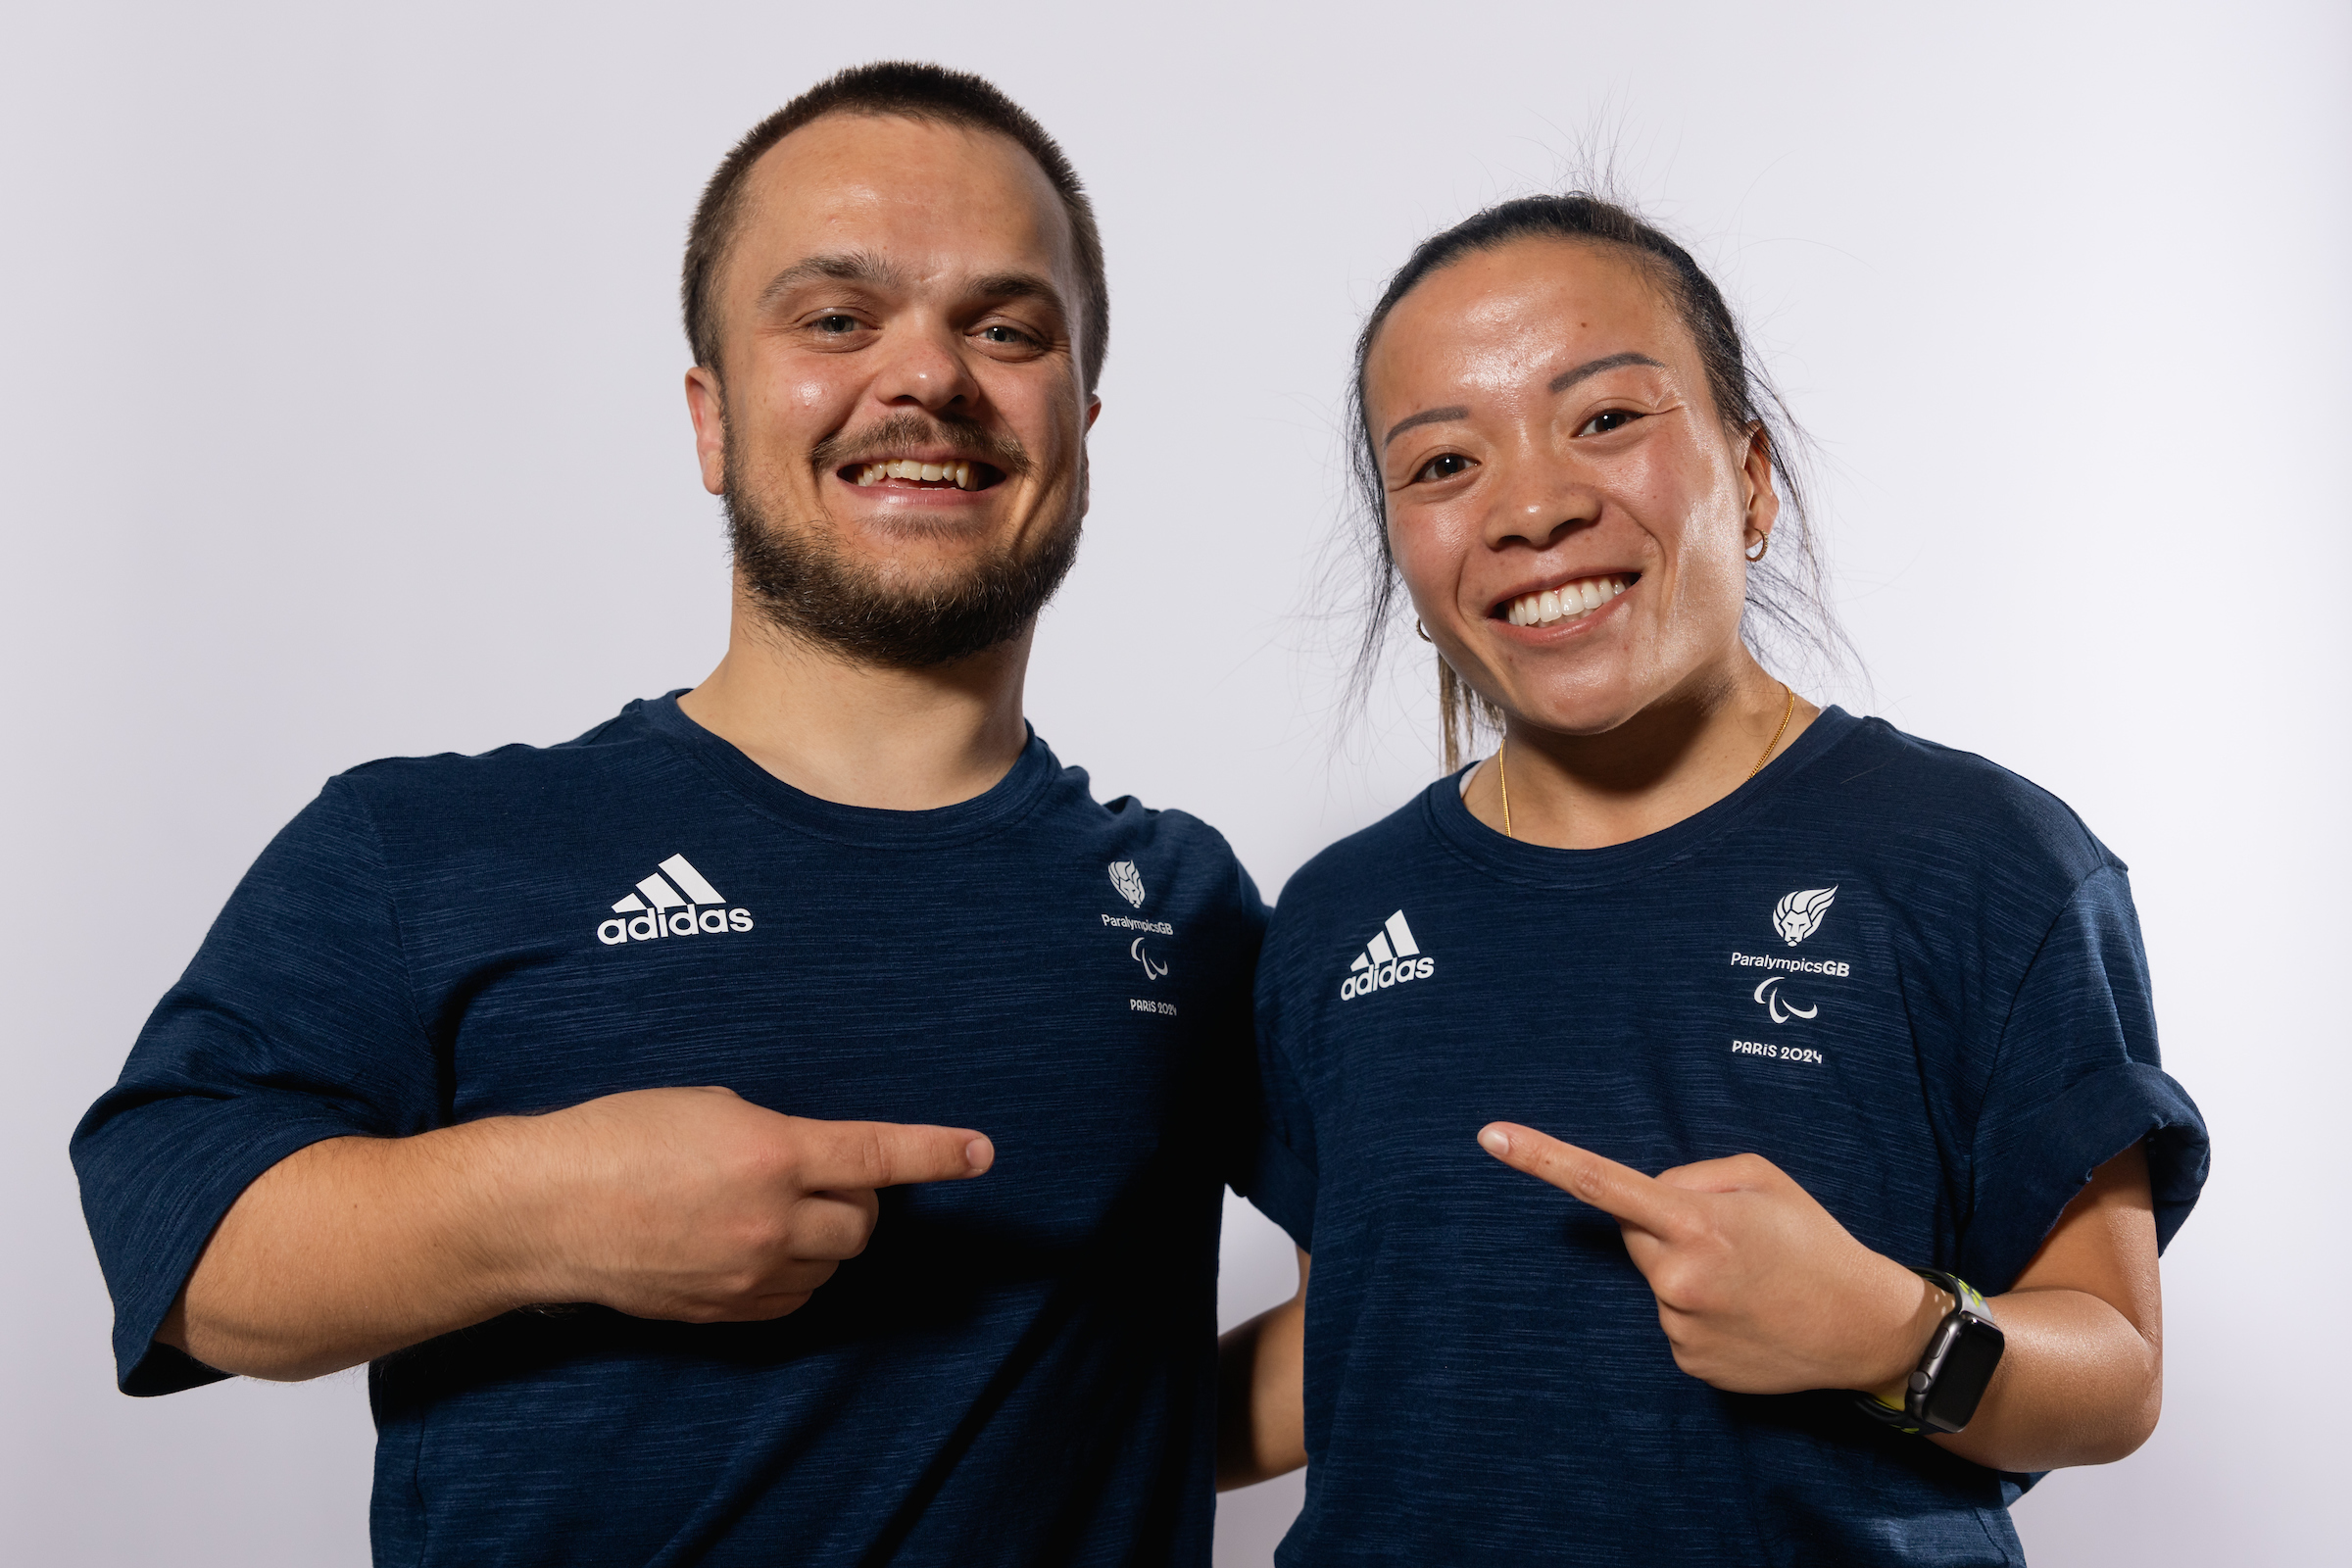 Choong will also partner Jack Shephard in the SH6 mixed badminton doubles in Paris 